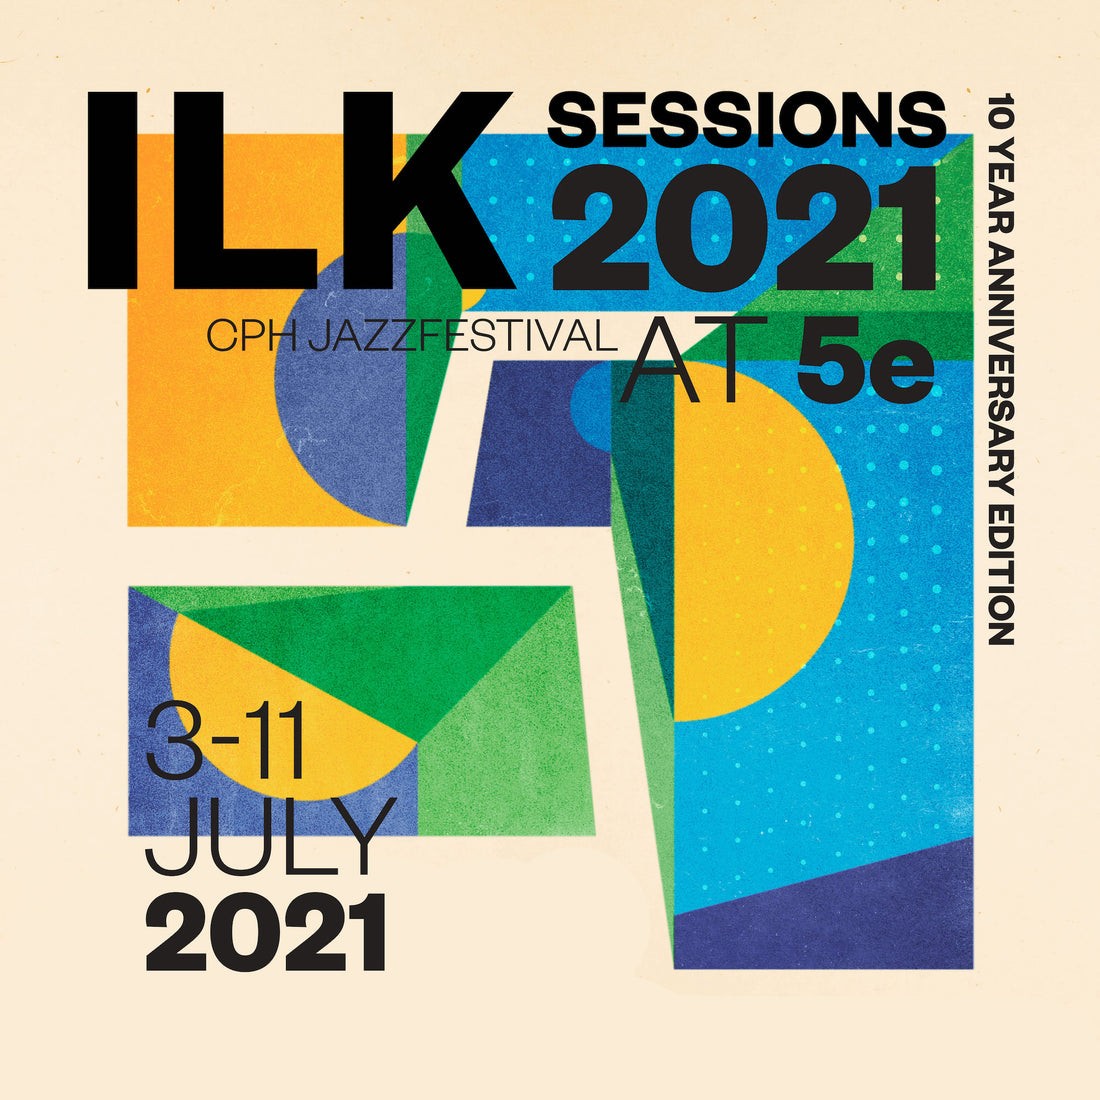 ILK Sessions at 5e (10 Year Anniversary Edition)  // July 3 - 11